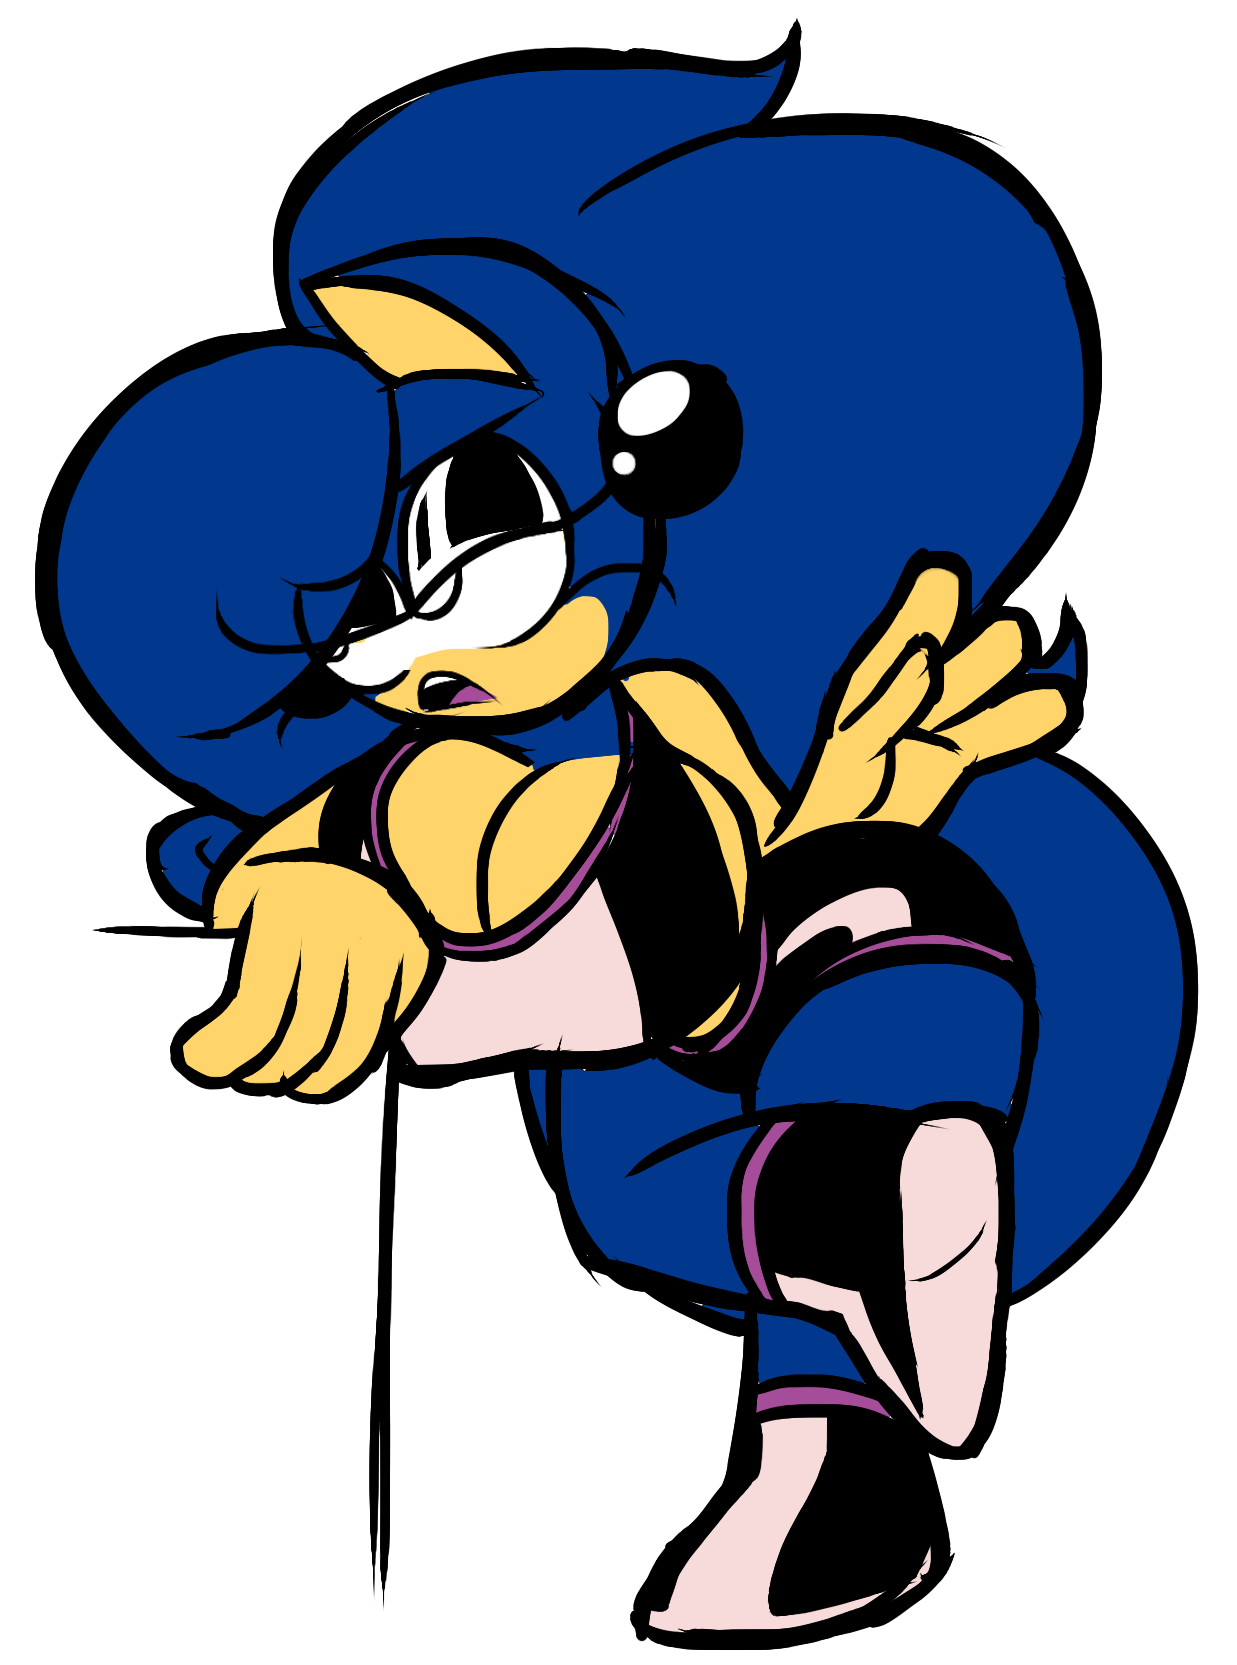 sonicboobs: Sketchdump of this old design.